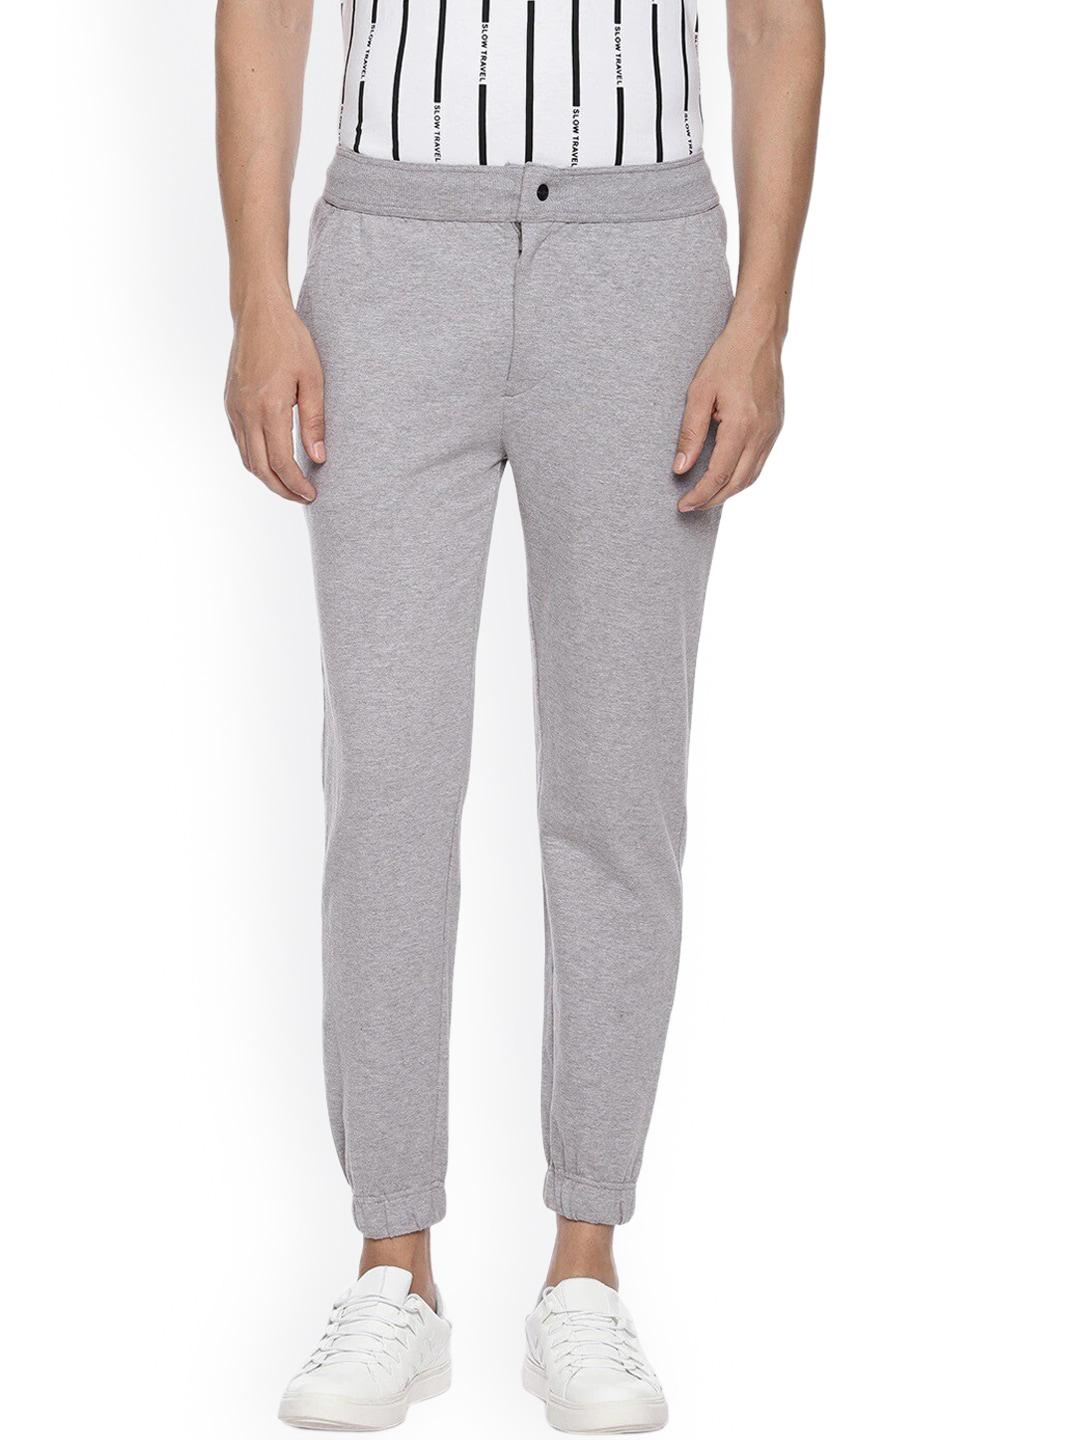 pepe-jeans-men-grey-solid-cotton-joggers